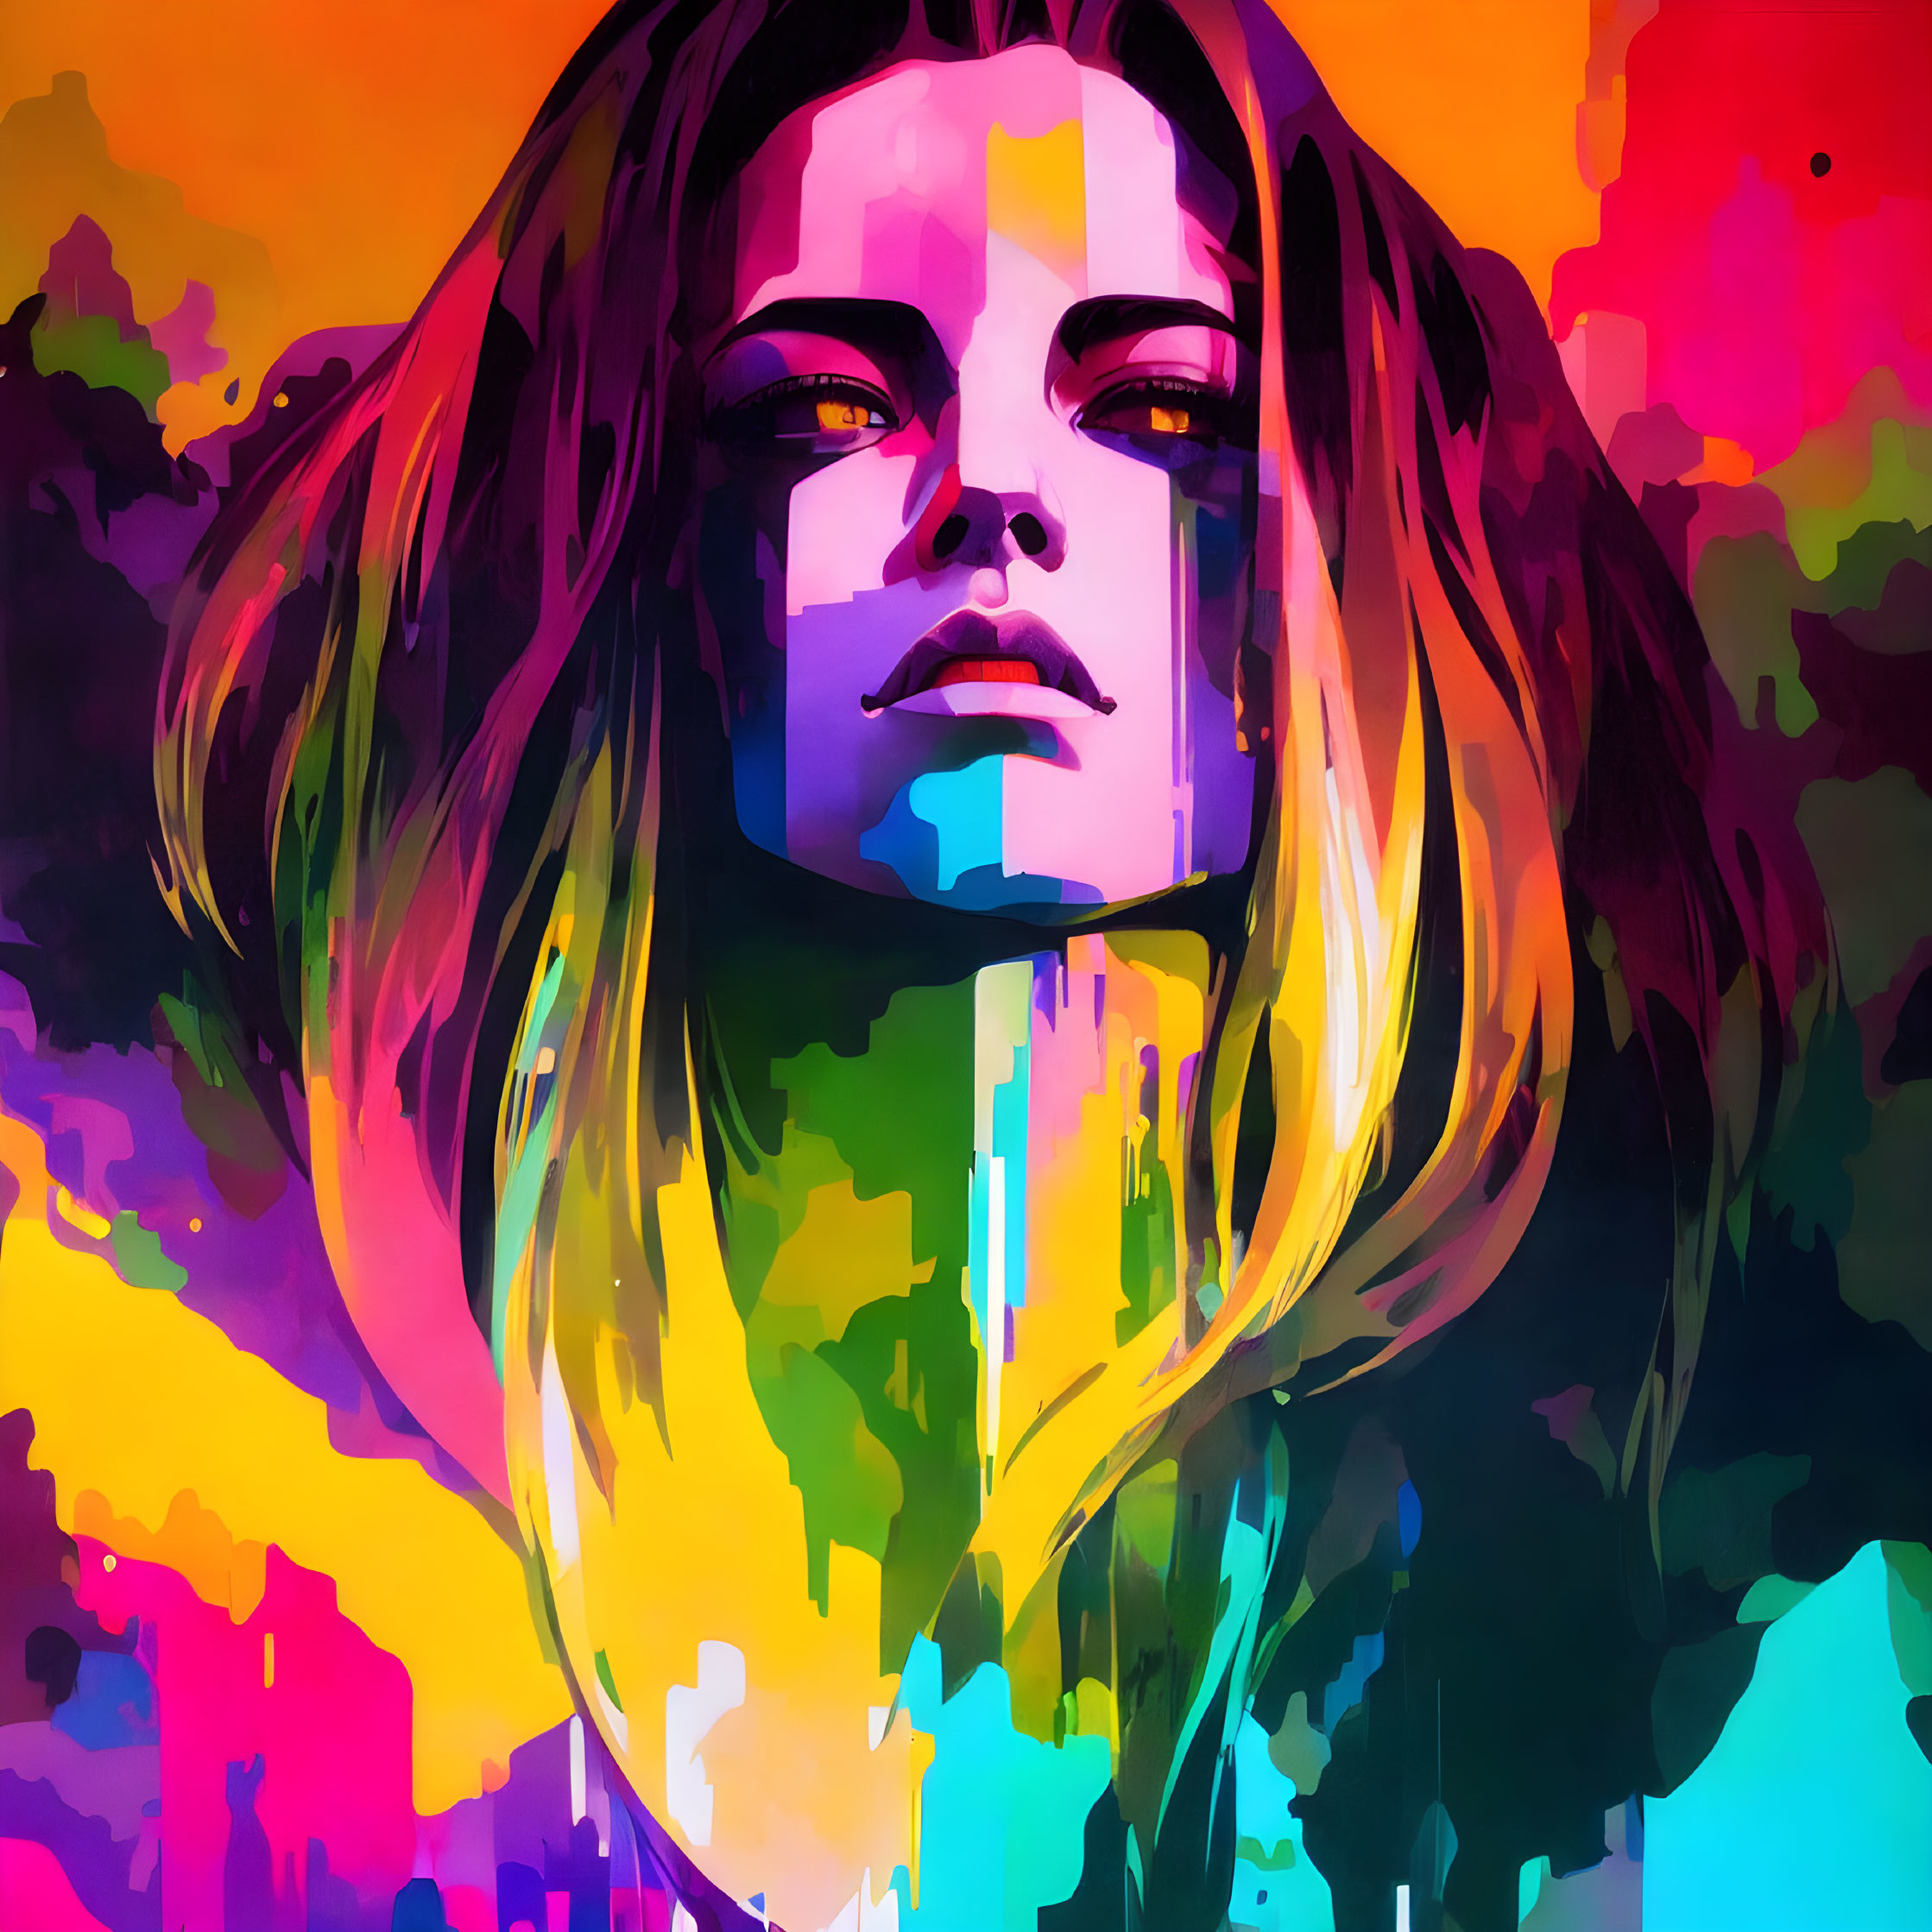 Colorful Abstract Portrait of Woman with Flowing Hair and Intense Gaze